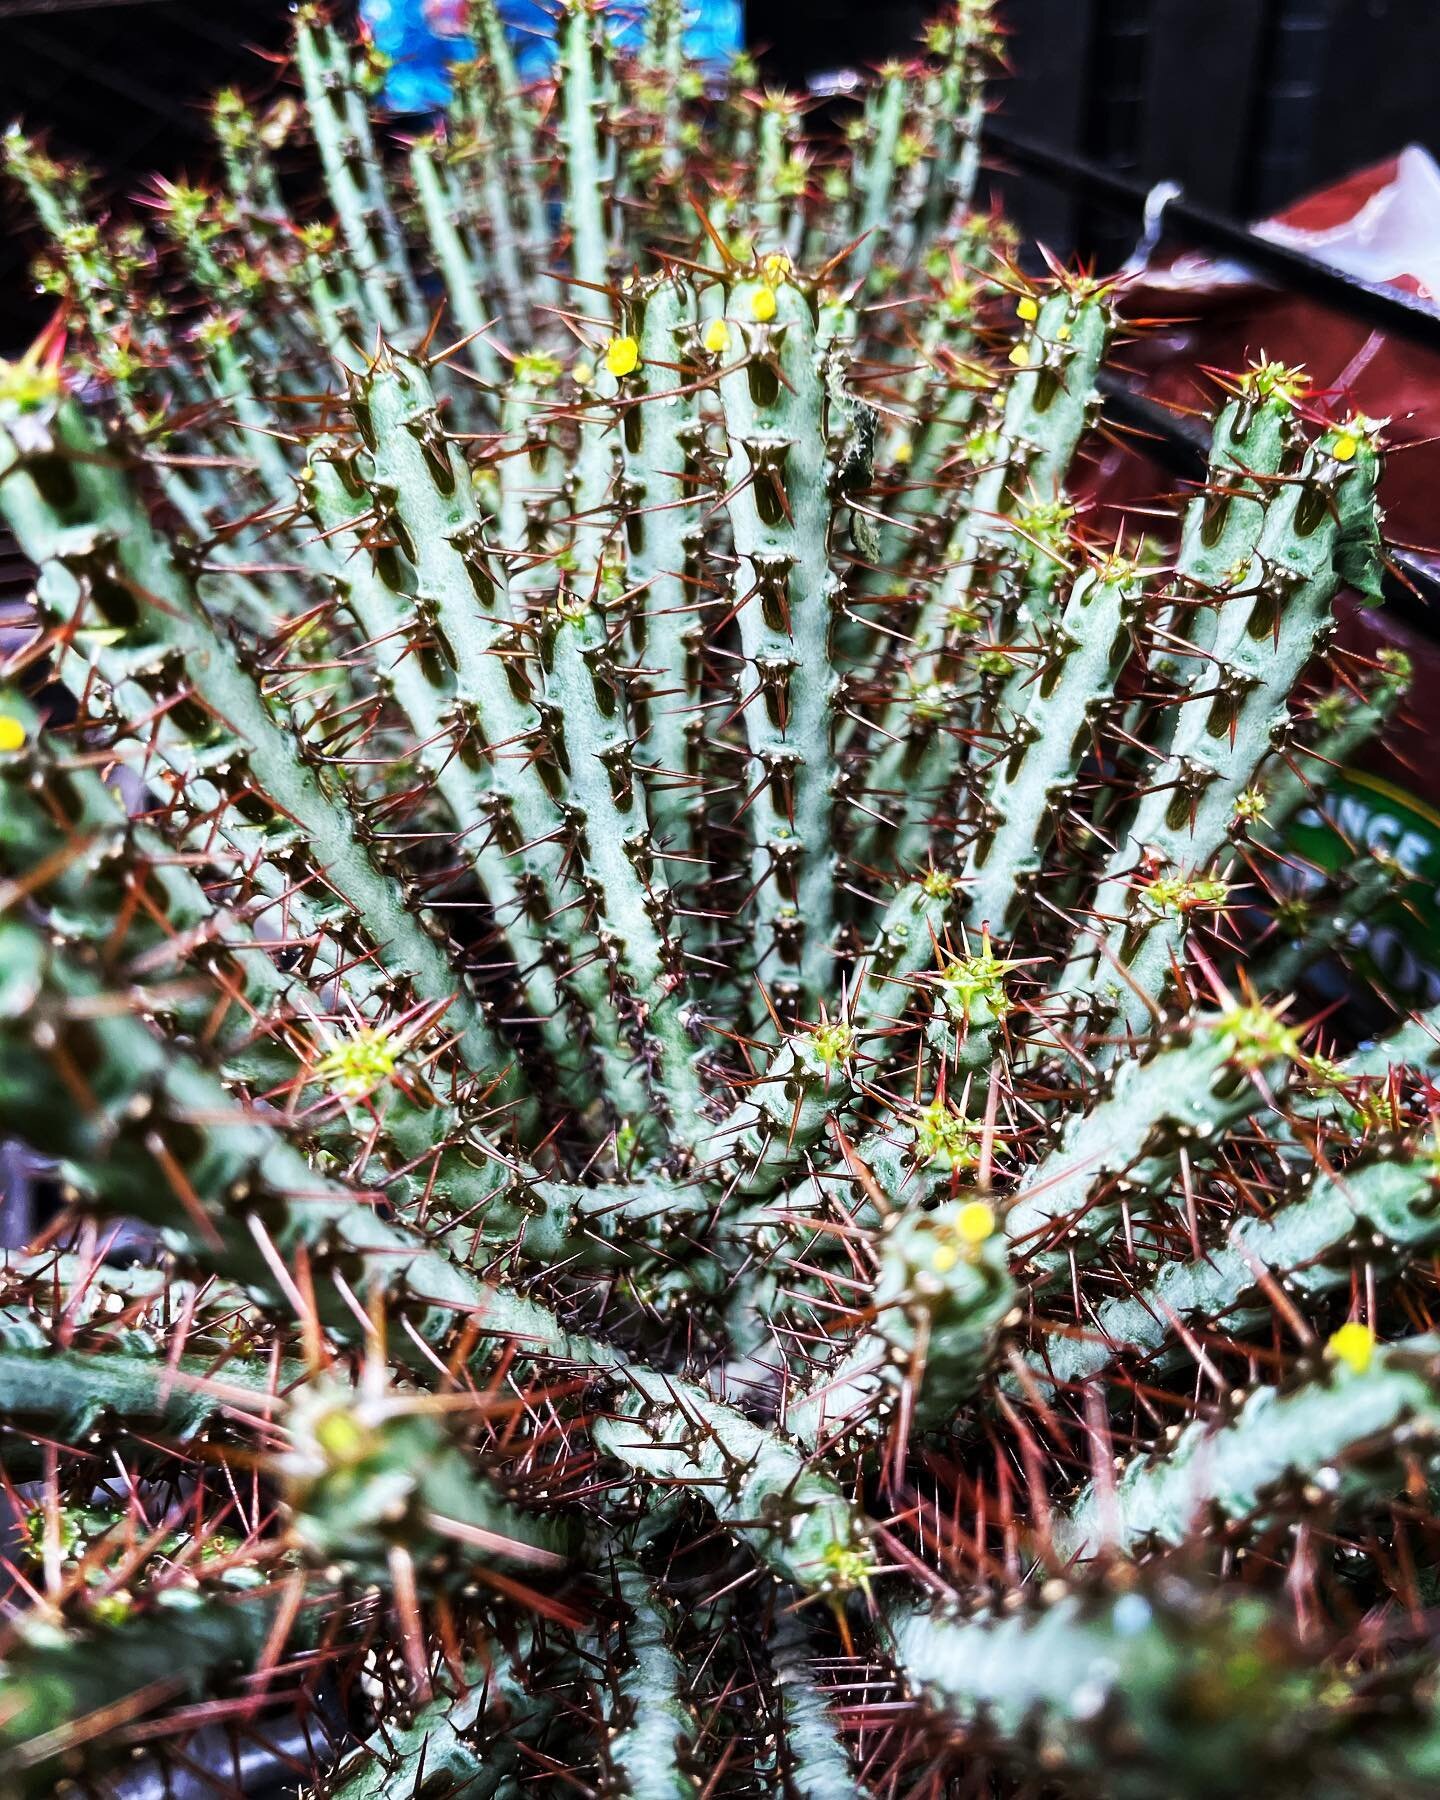 What did one cactus say to the fancy cactus?You&rsquo;re lookin&rsquo; sharp! 

#mossyfern #allthingsplants